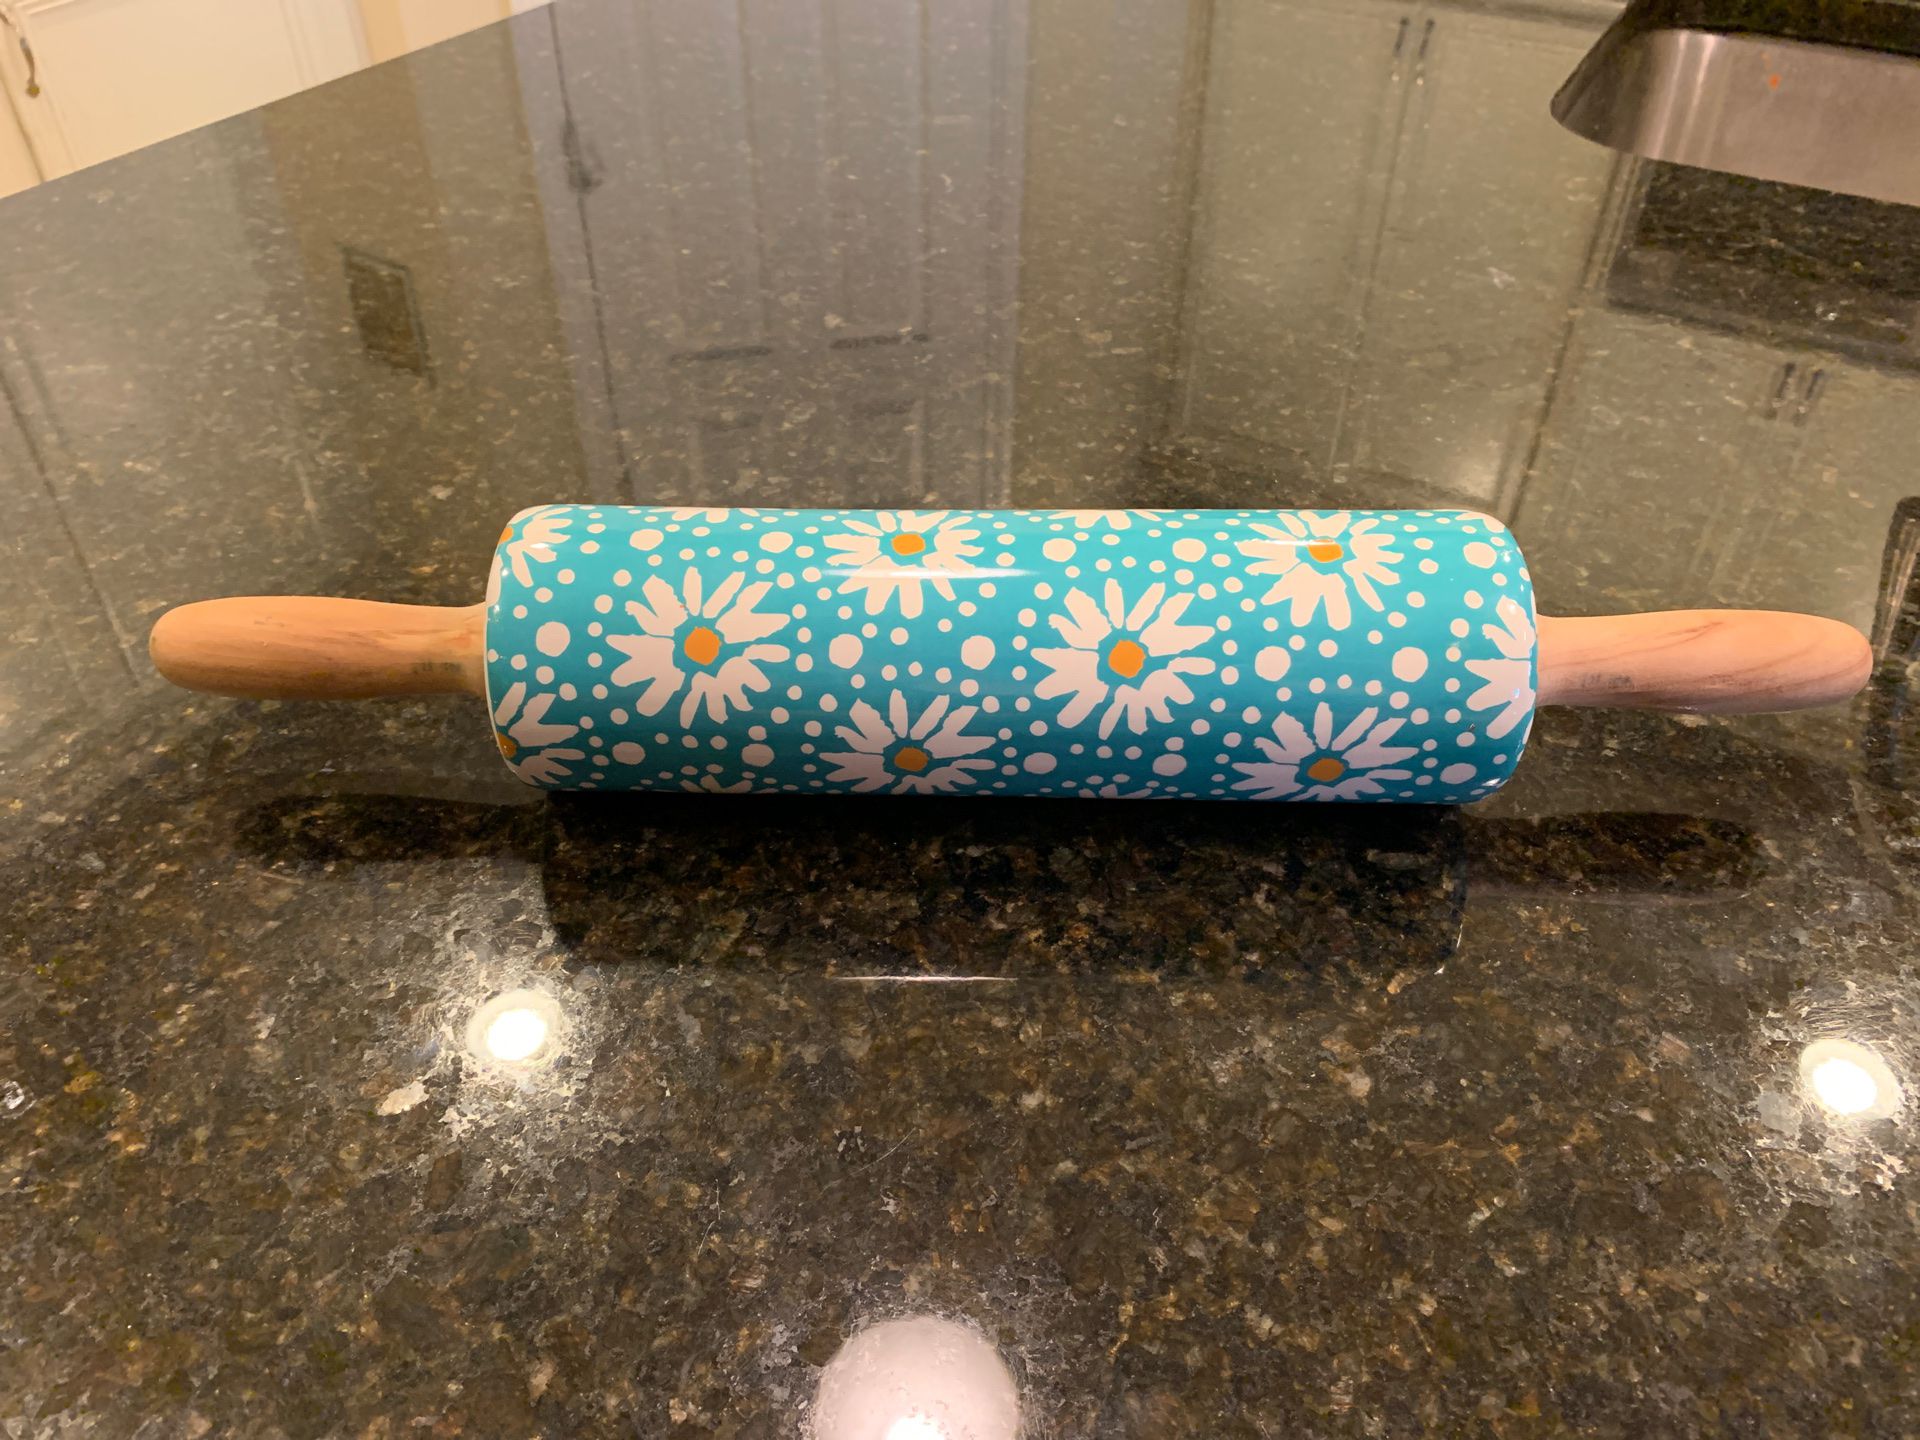 Pioneer Woman Ceramic Floral Decal Rolling Pin with wood handles. Measures 13 inches long.